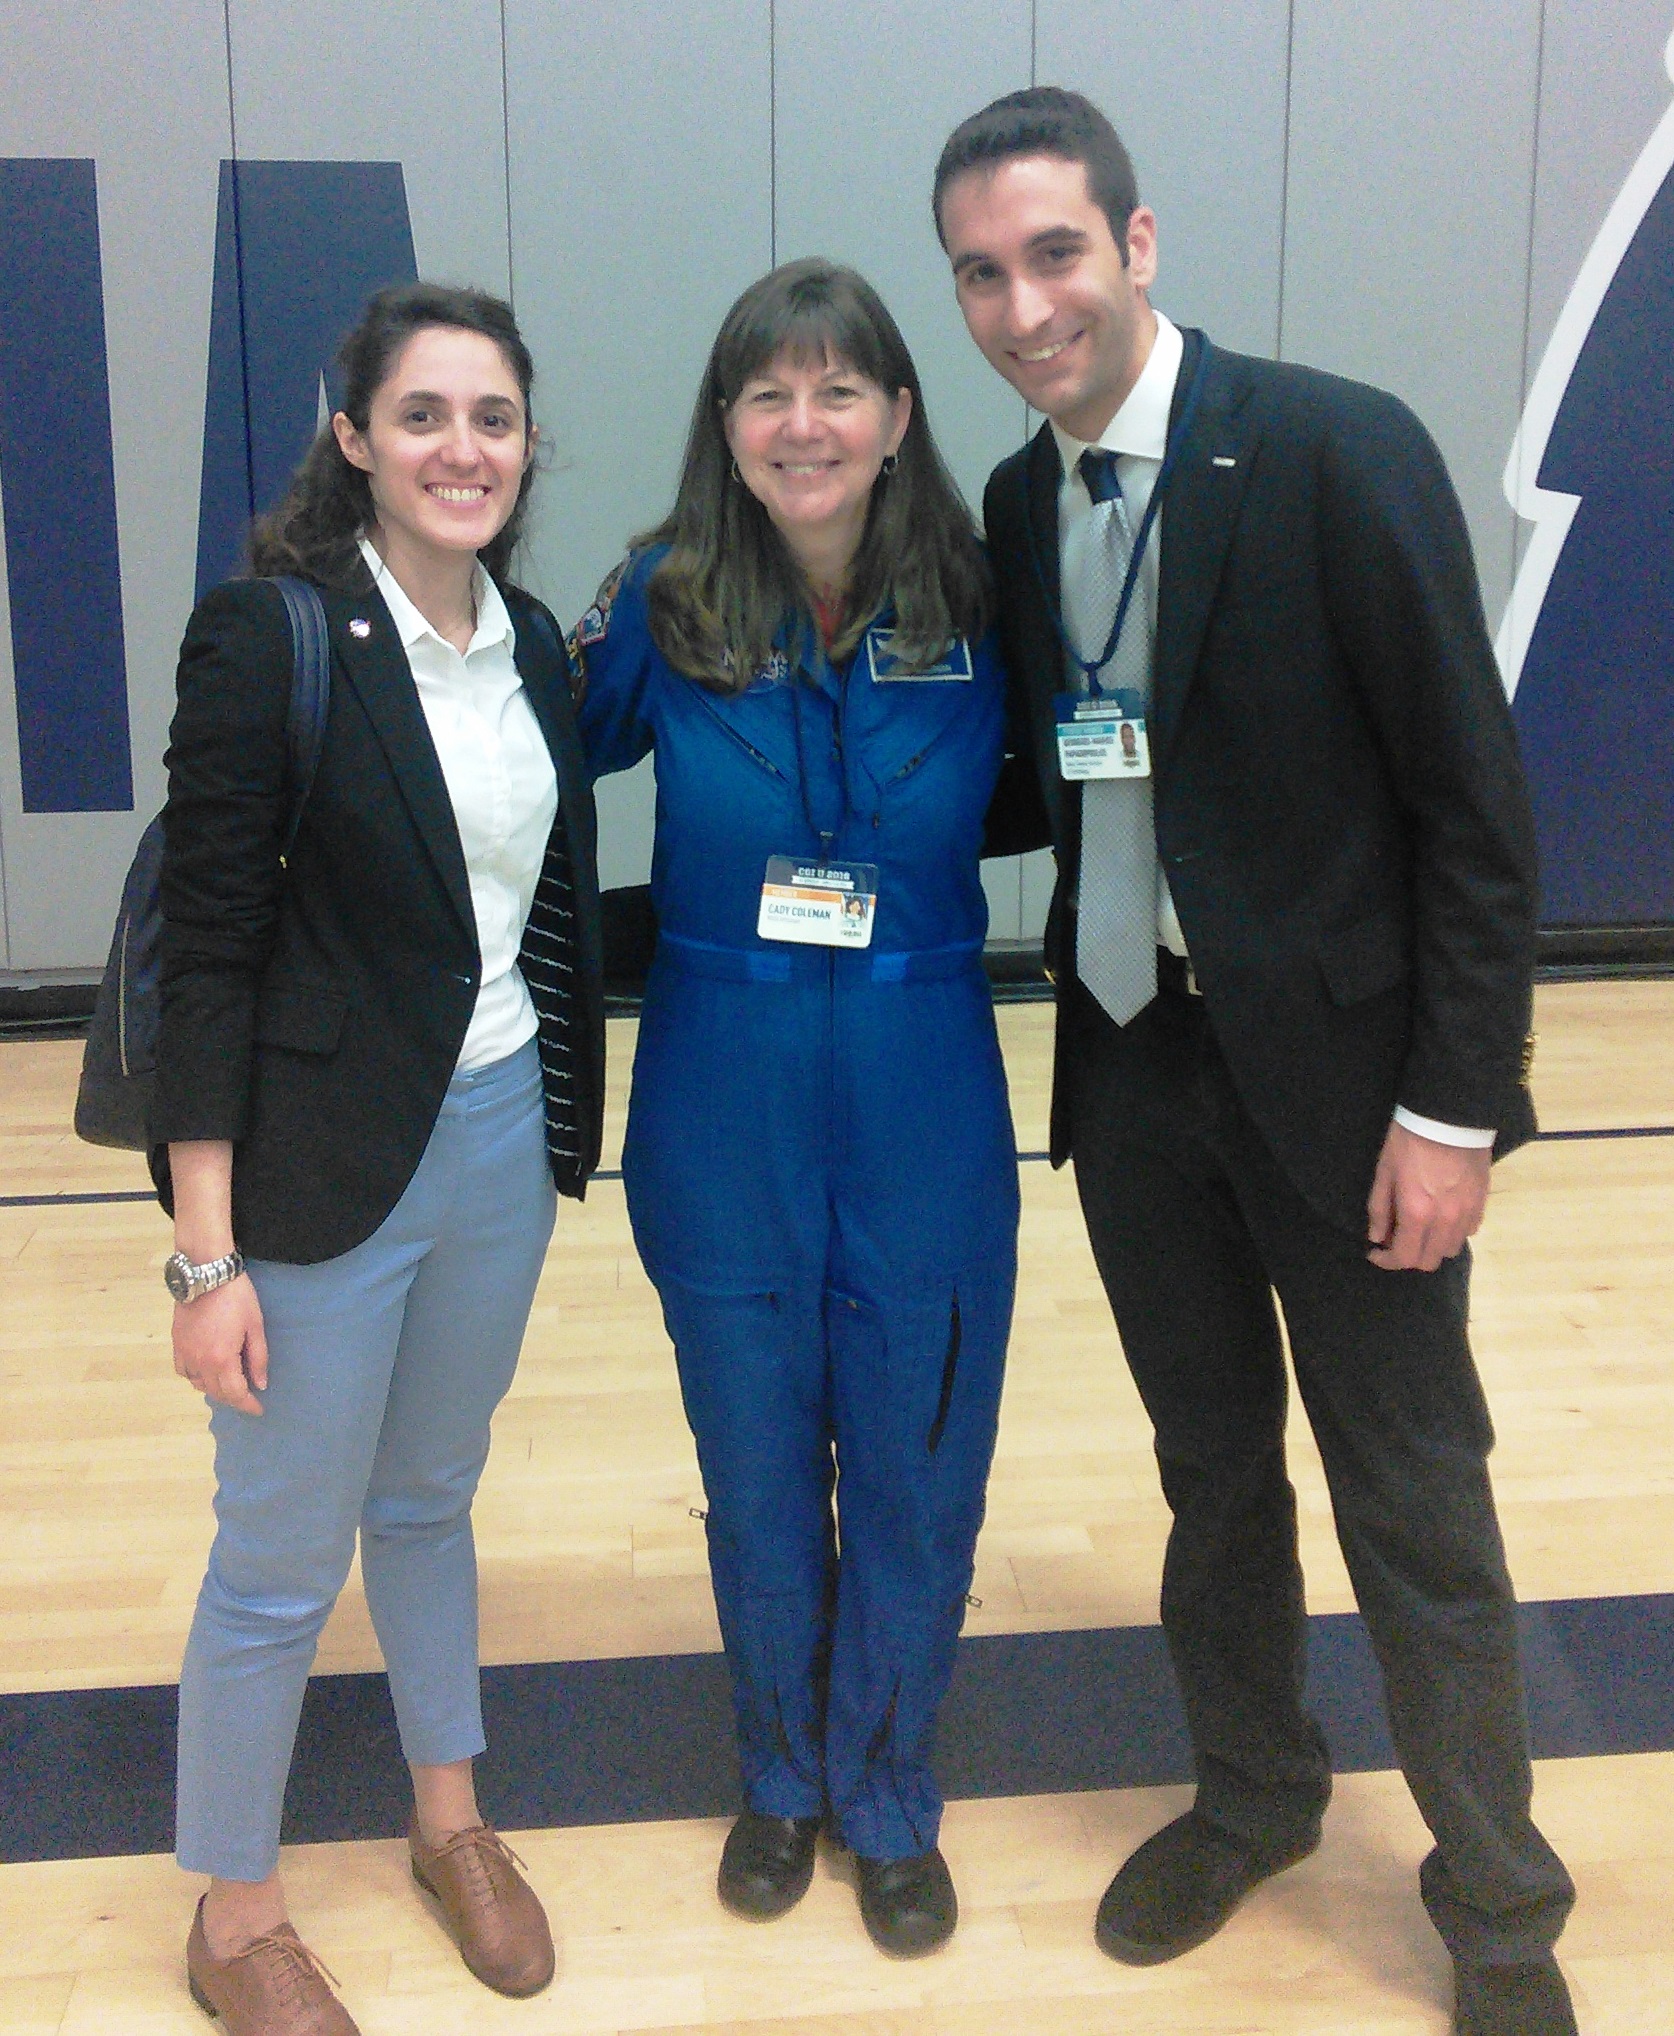 Enlarged view: ETH Zurich students with Astronaut Cady Coleman at CGI U 2016